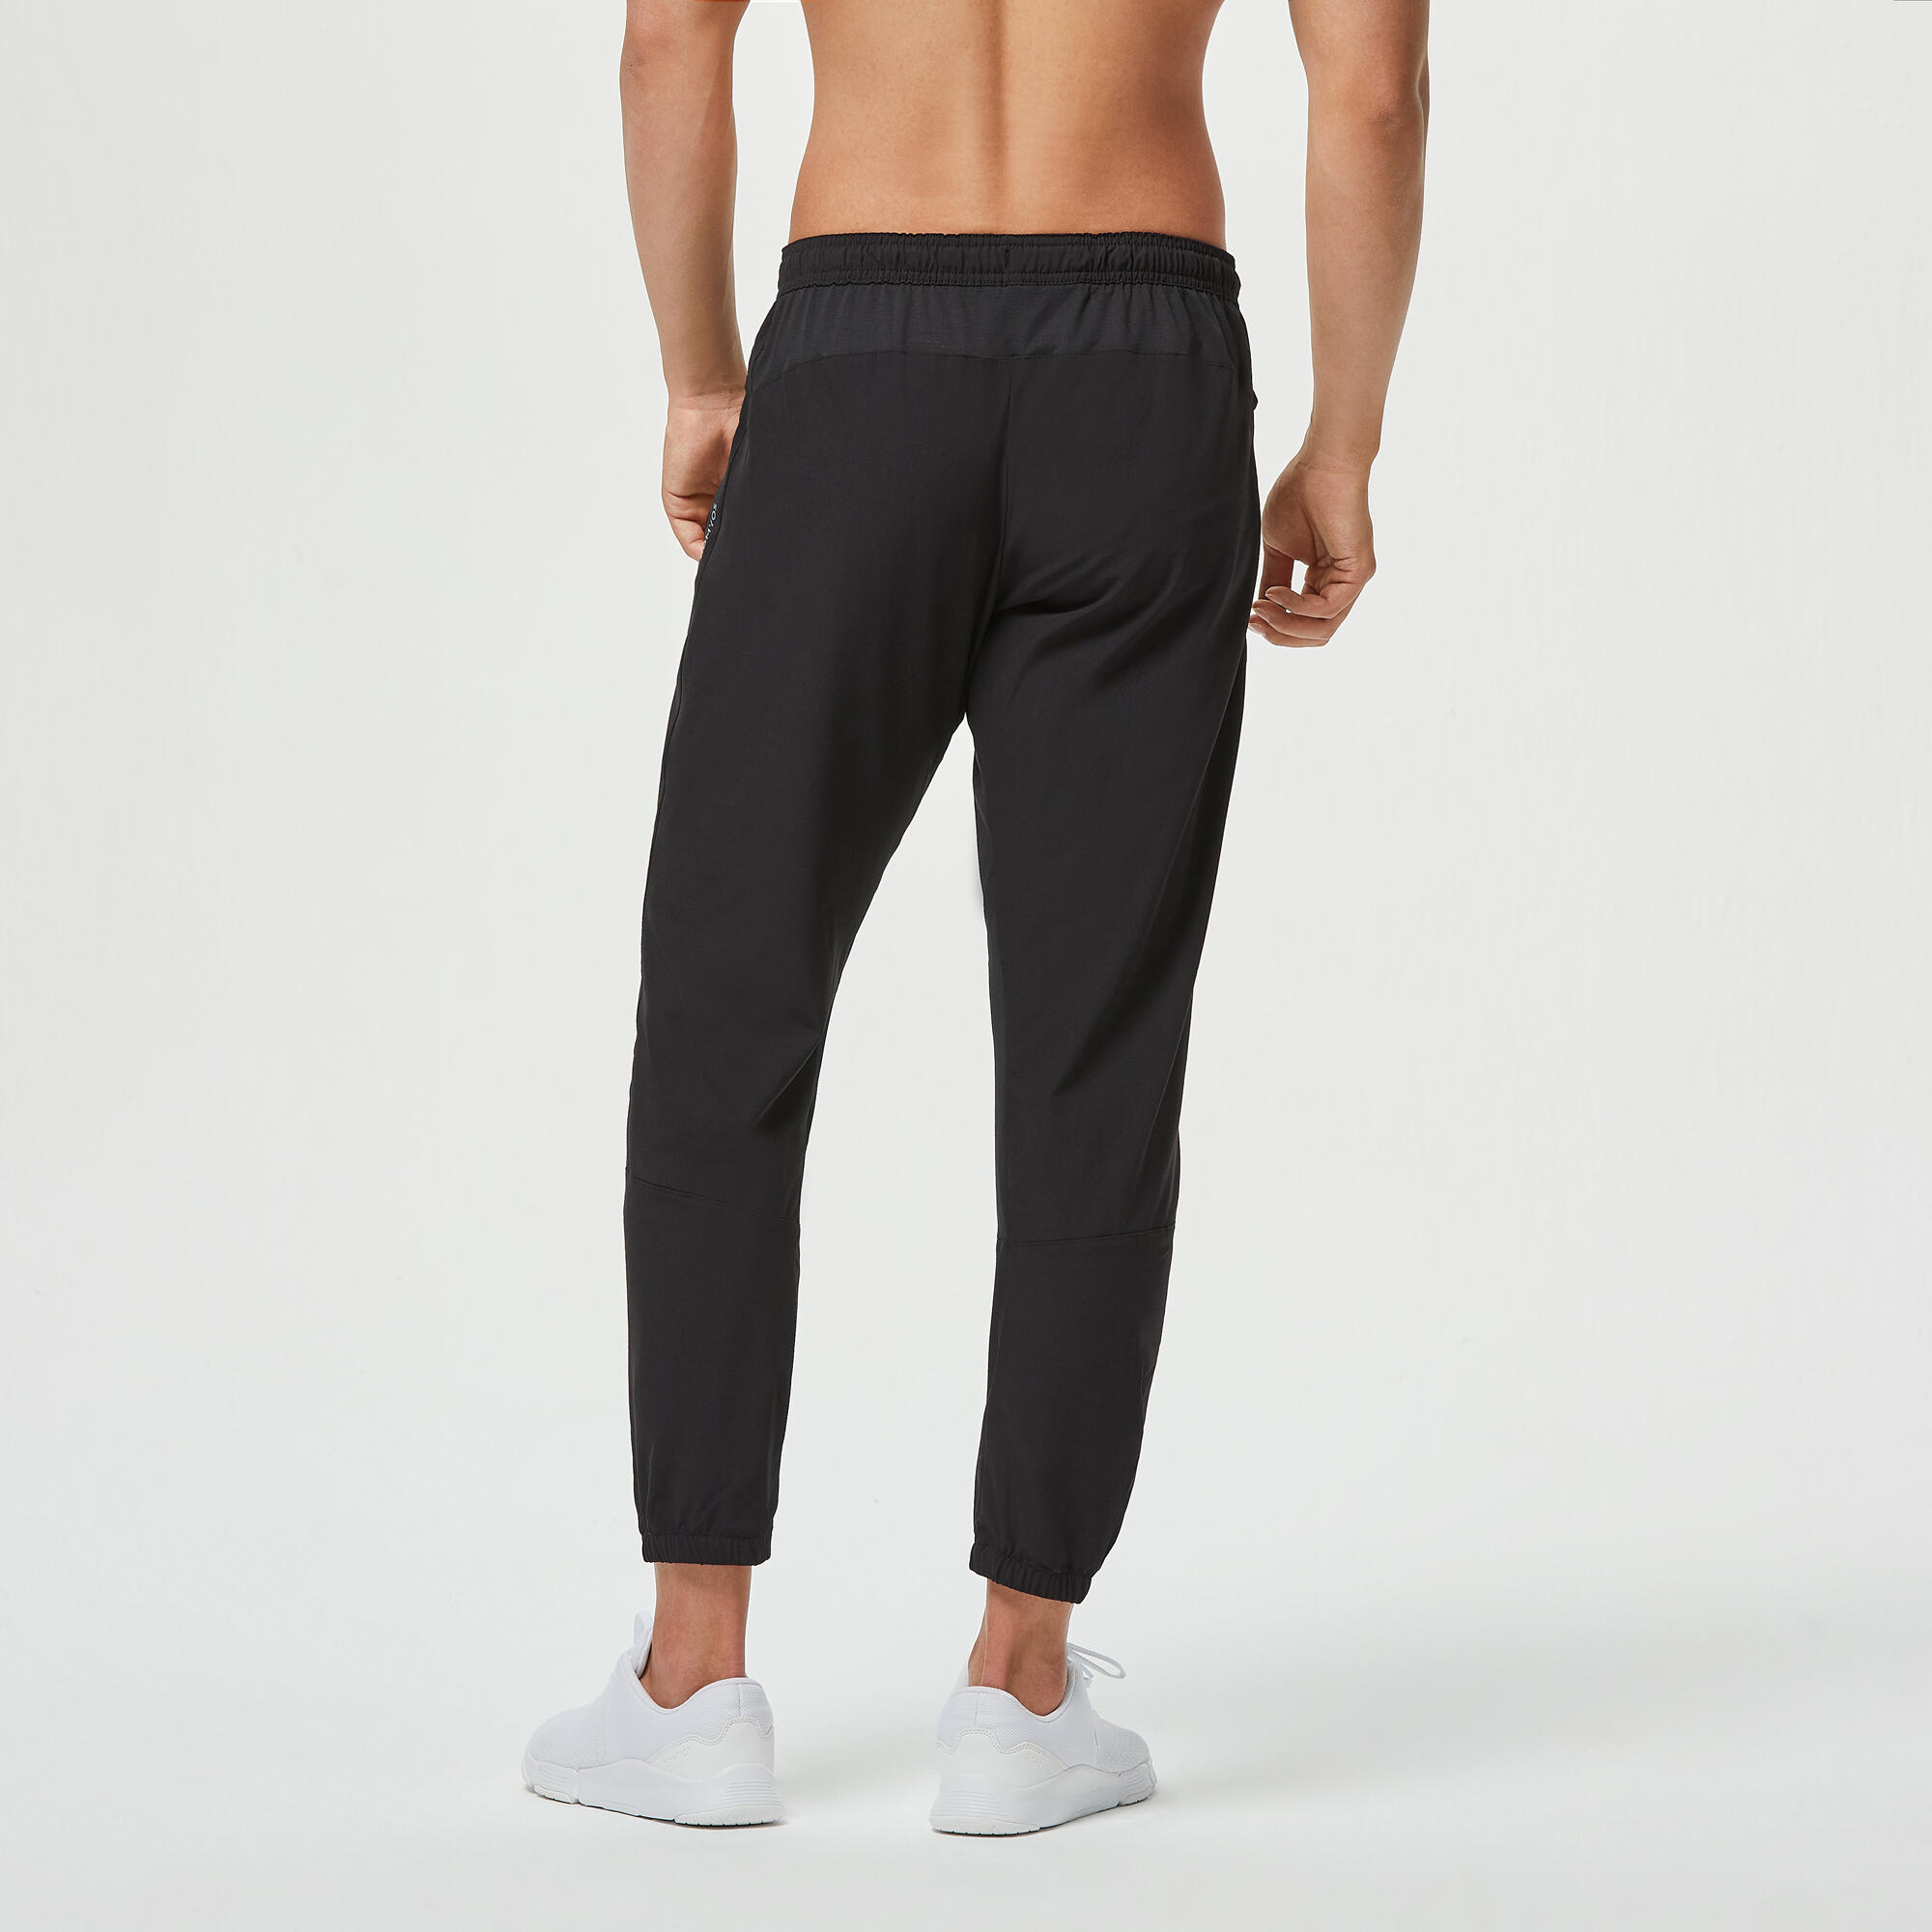 Decathlon Singapore- Trendy Athleisure Outfits From World of Sports | Style  Hunter – Singapore